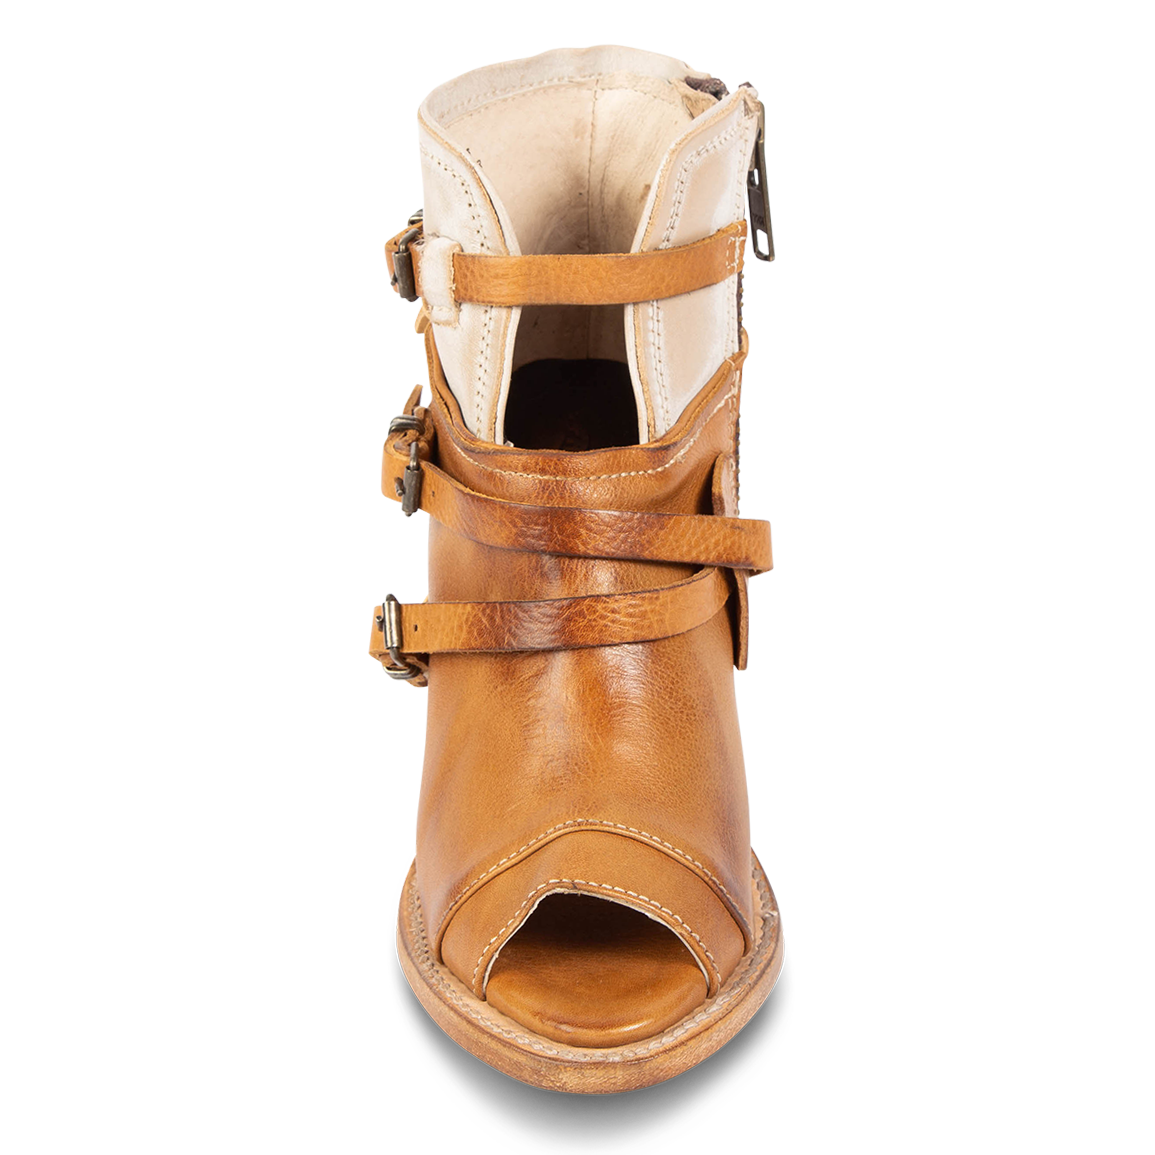 Front view showing cutout and leather ankle strap FREEBIRD women's Carterr tan multi sandal